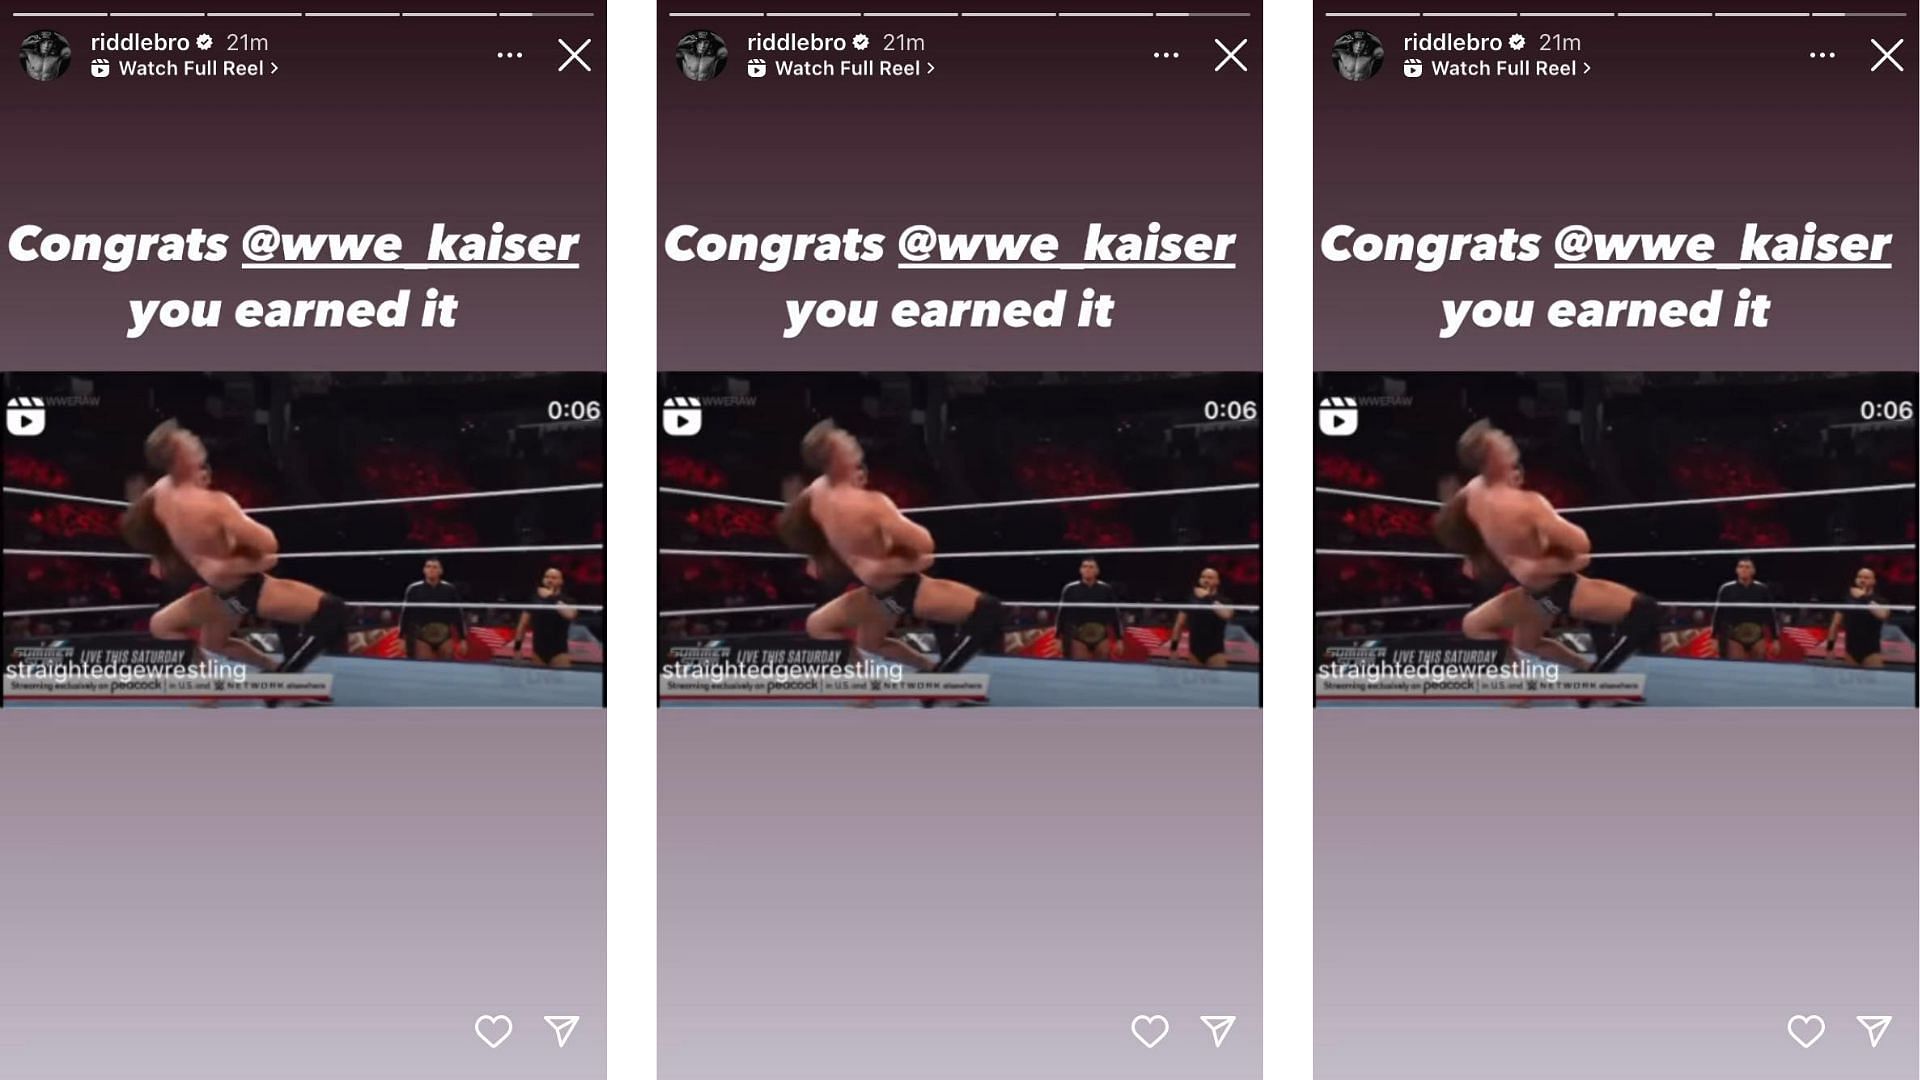 Riddle congratulates Ludwig Kaiser on Instagram.